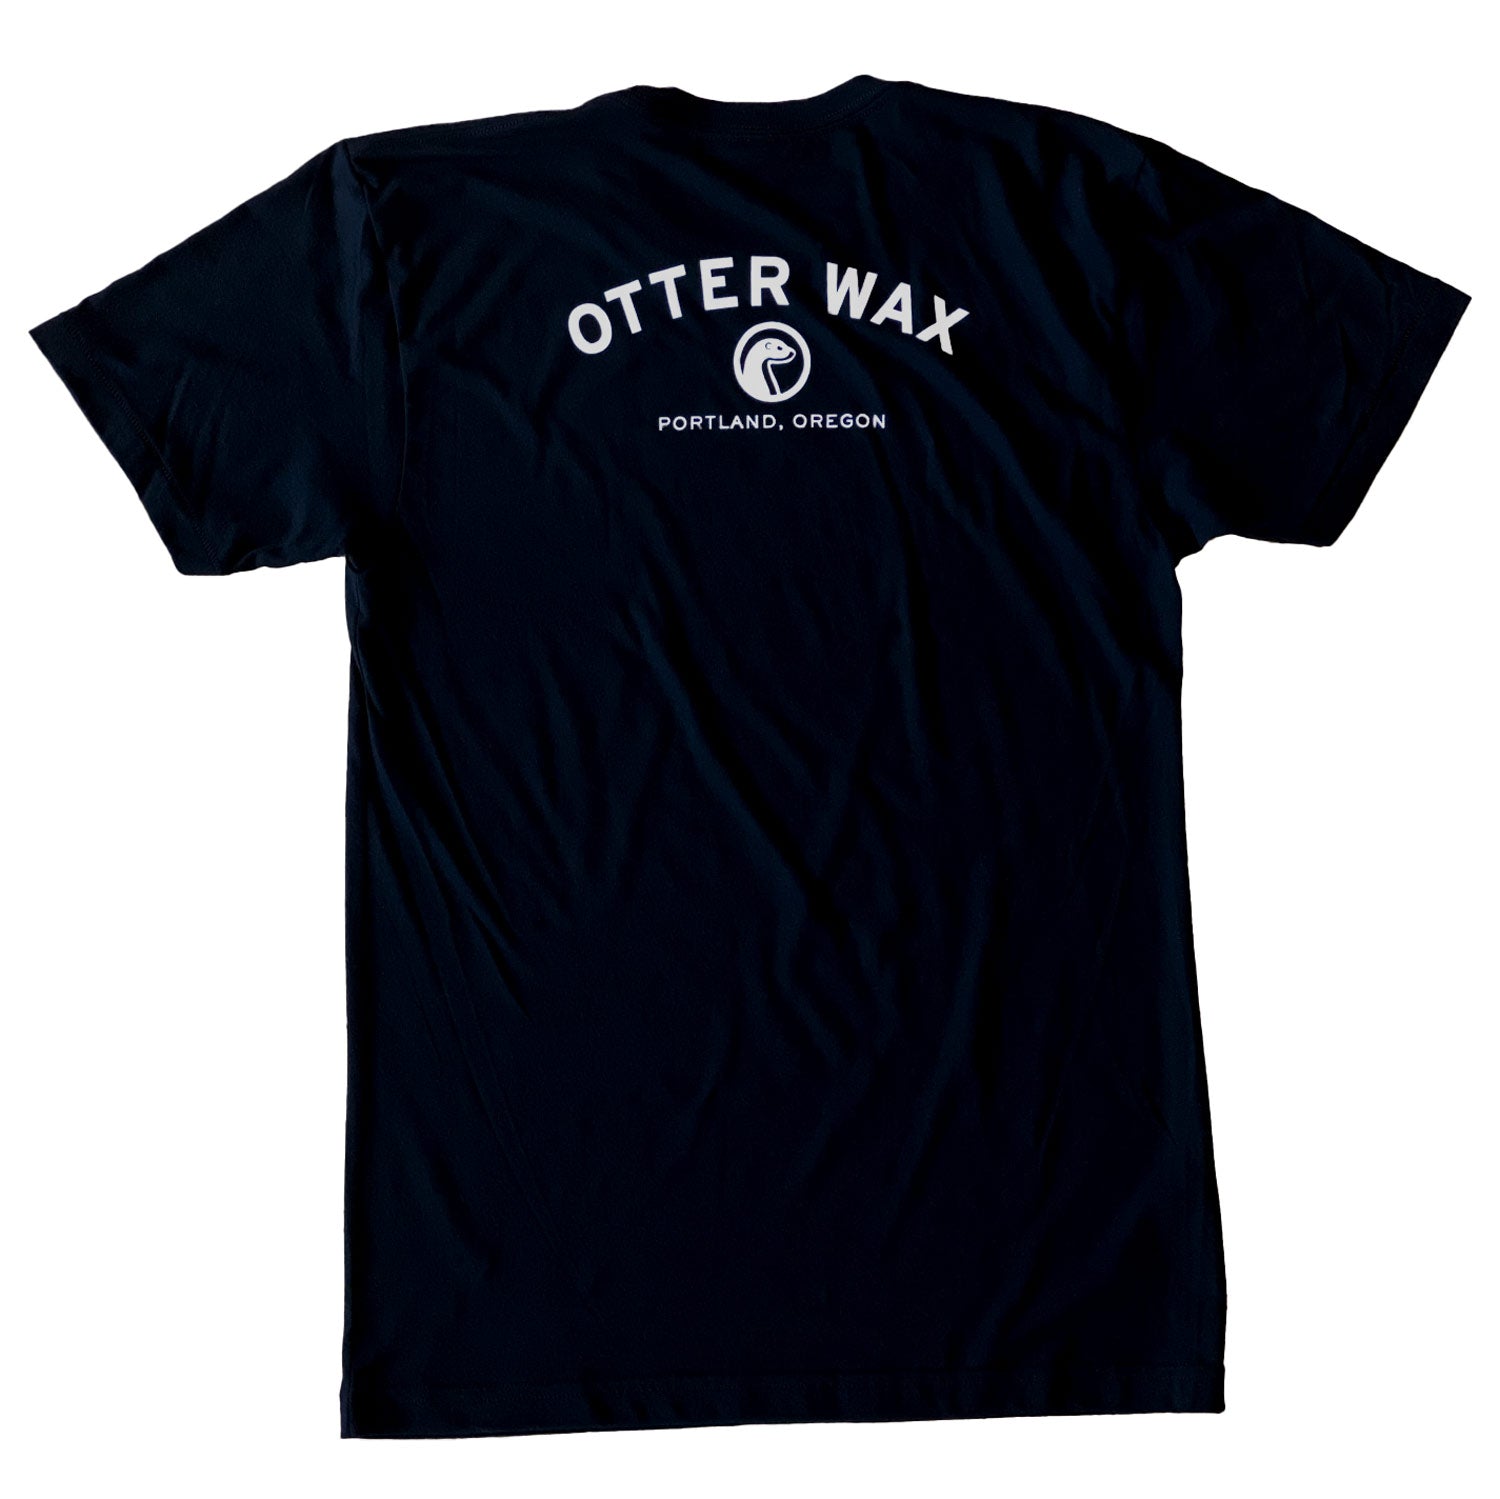 Otter Wax Fitted Cotton Unisex T-Shirt With Black Print Logo Front And Back In Black Fabric With White Screenprint Color Made In The USA